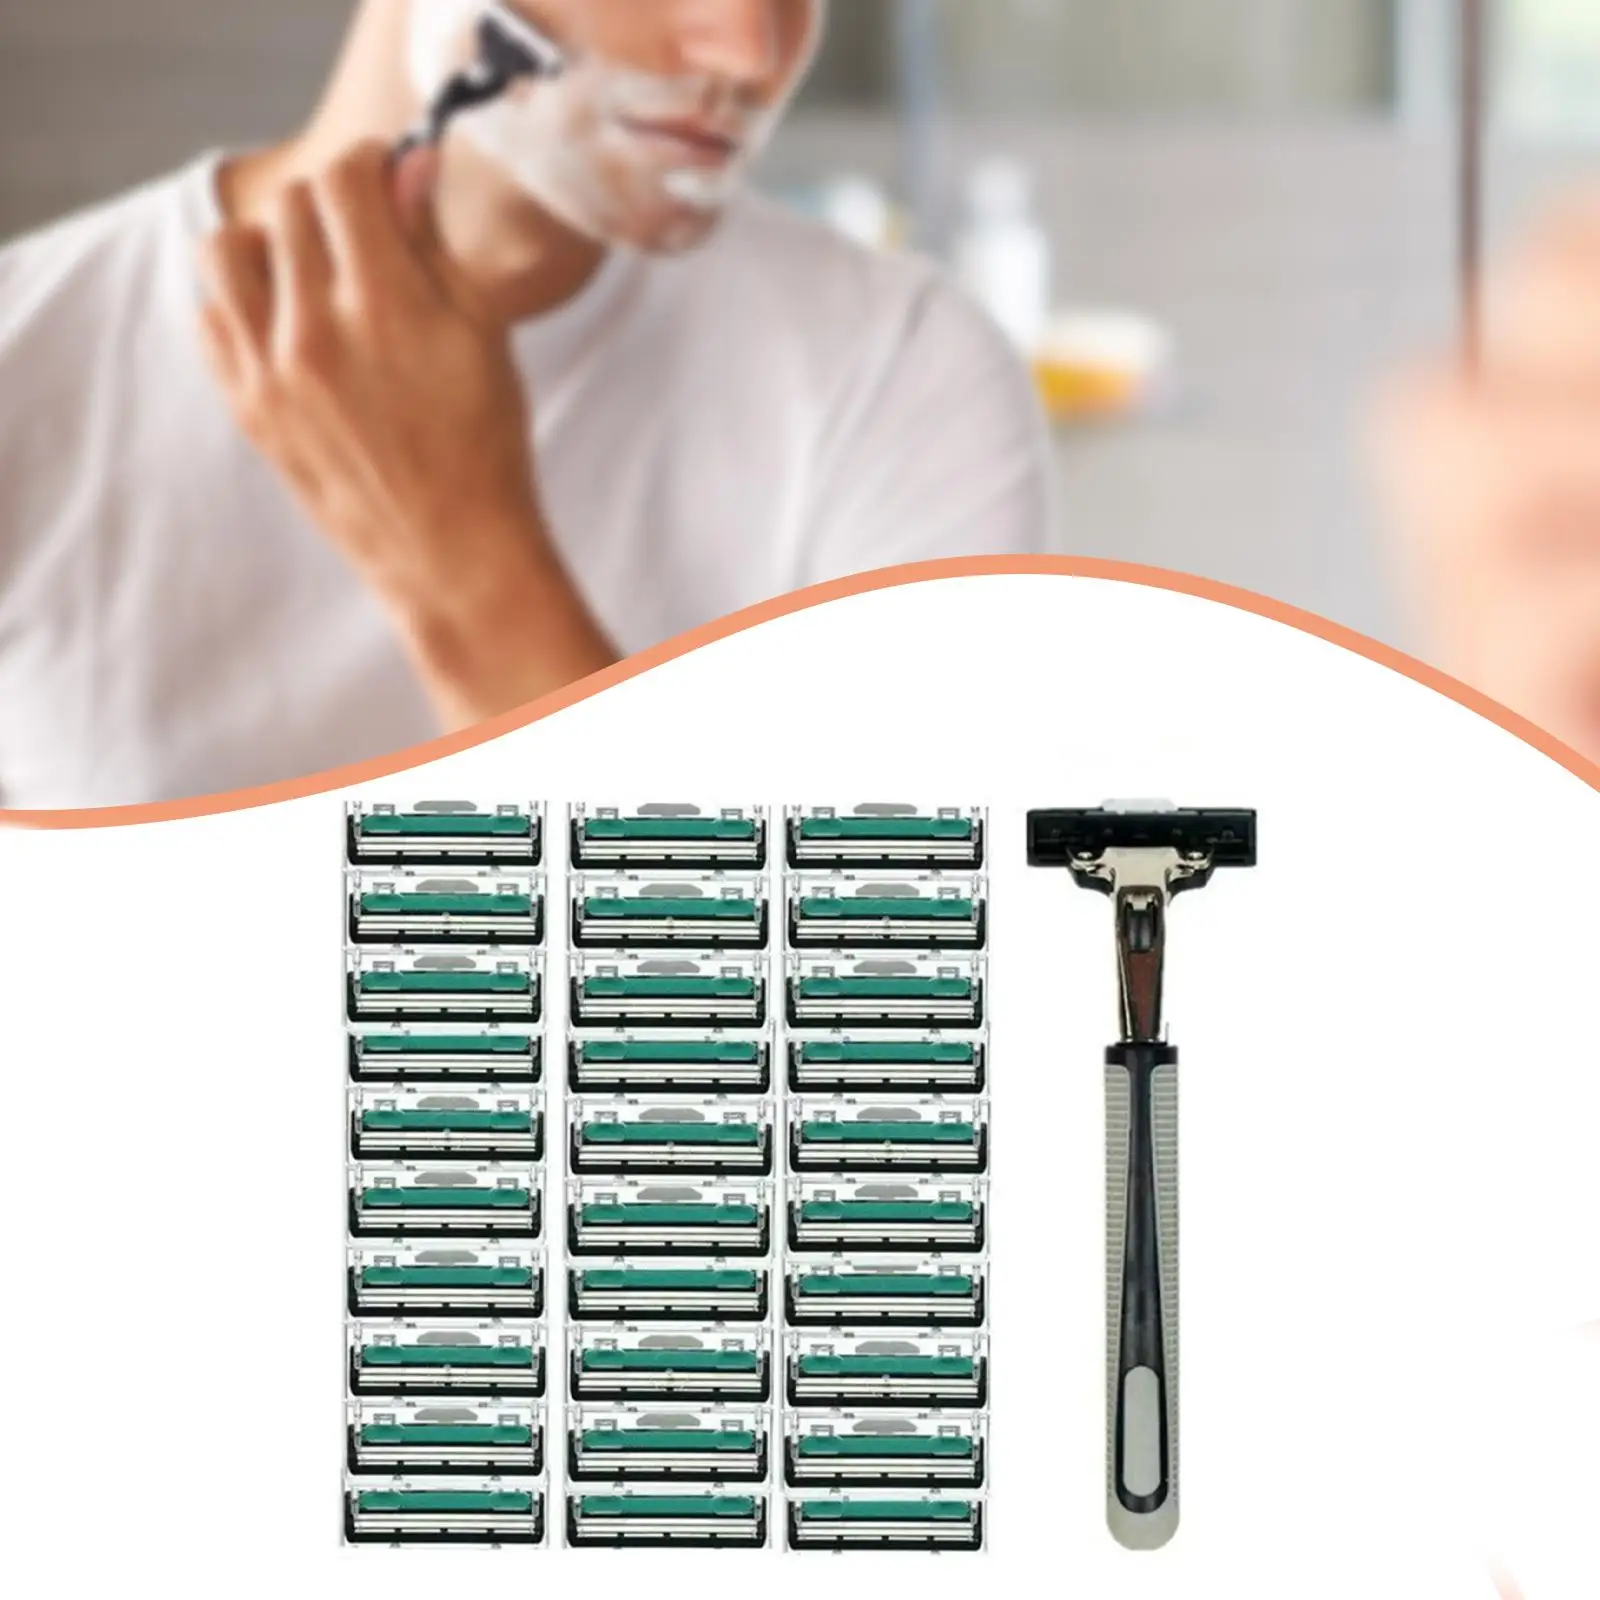 Manual Double Edge Shaver Face Shaver Rustproof Trimmer Nonslip Handle Hair